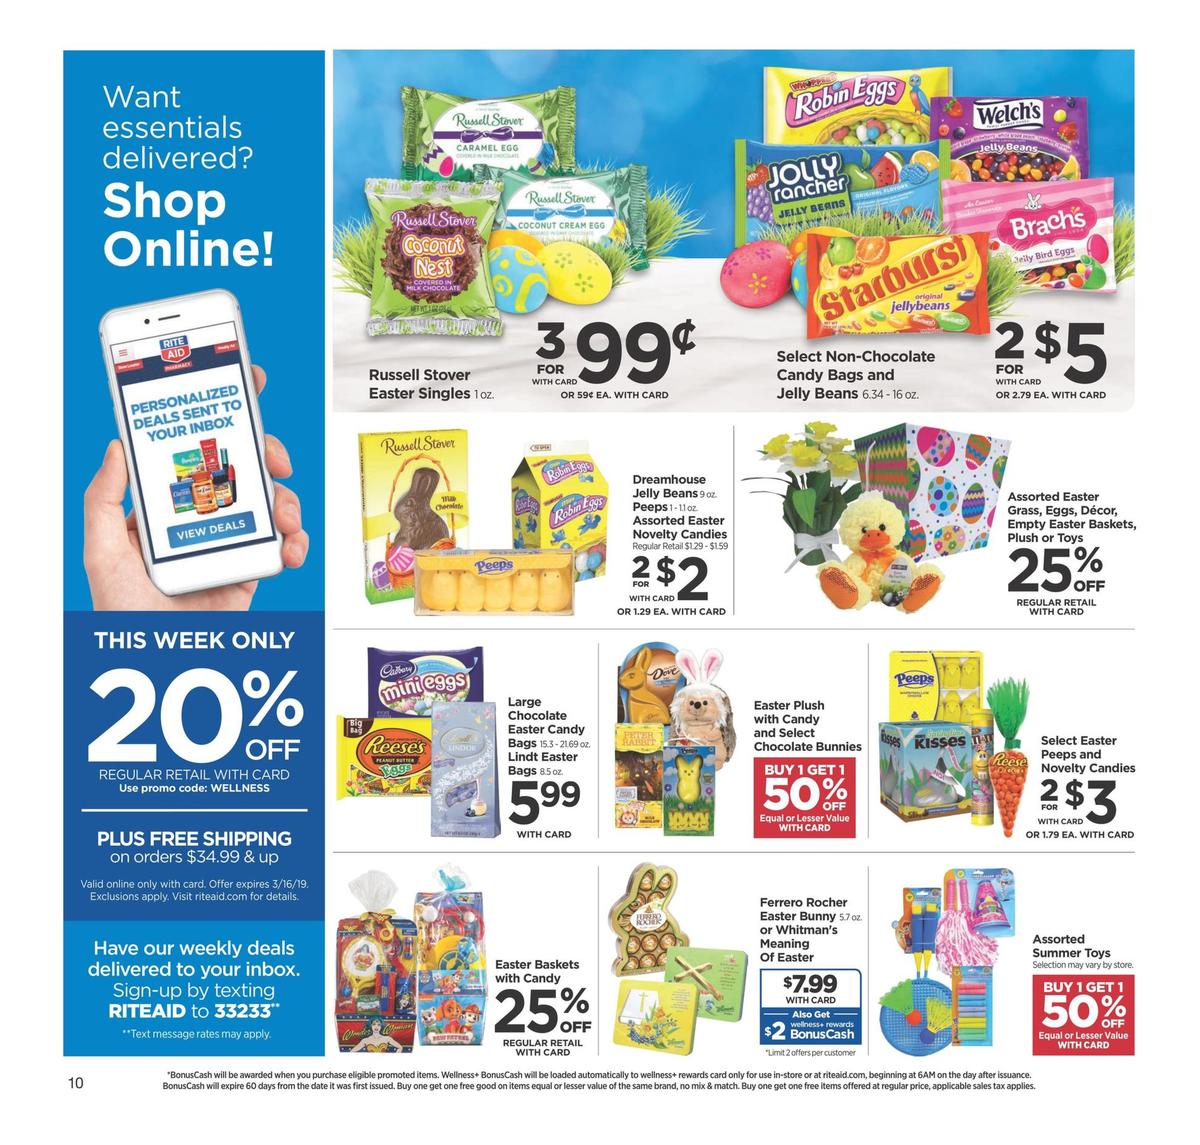 Rite Aid Weekly Ad from March 10